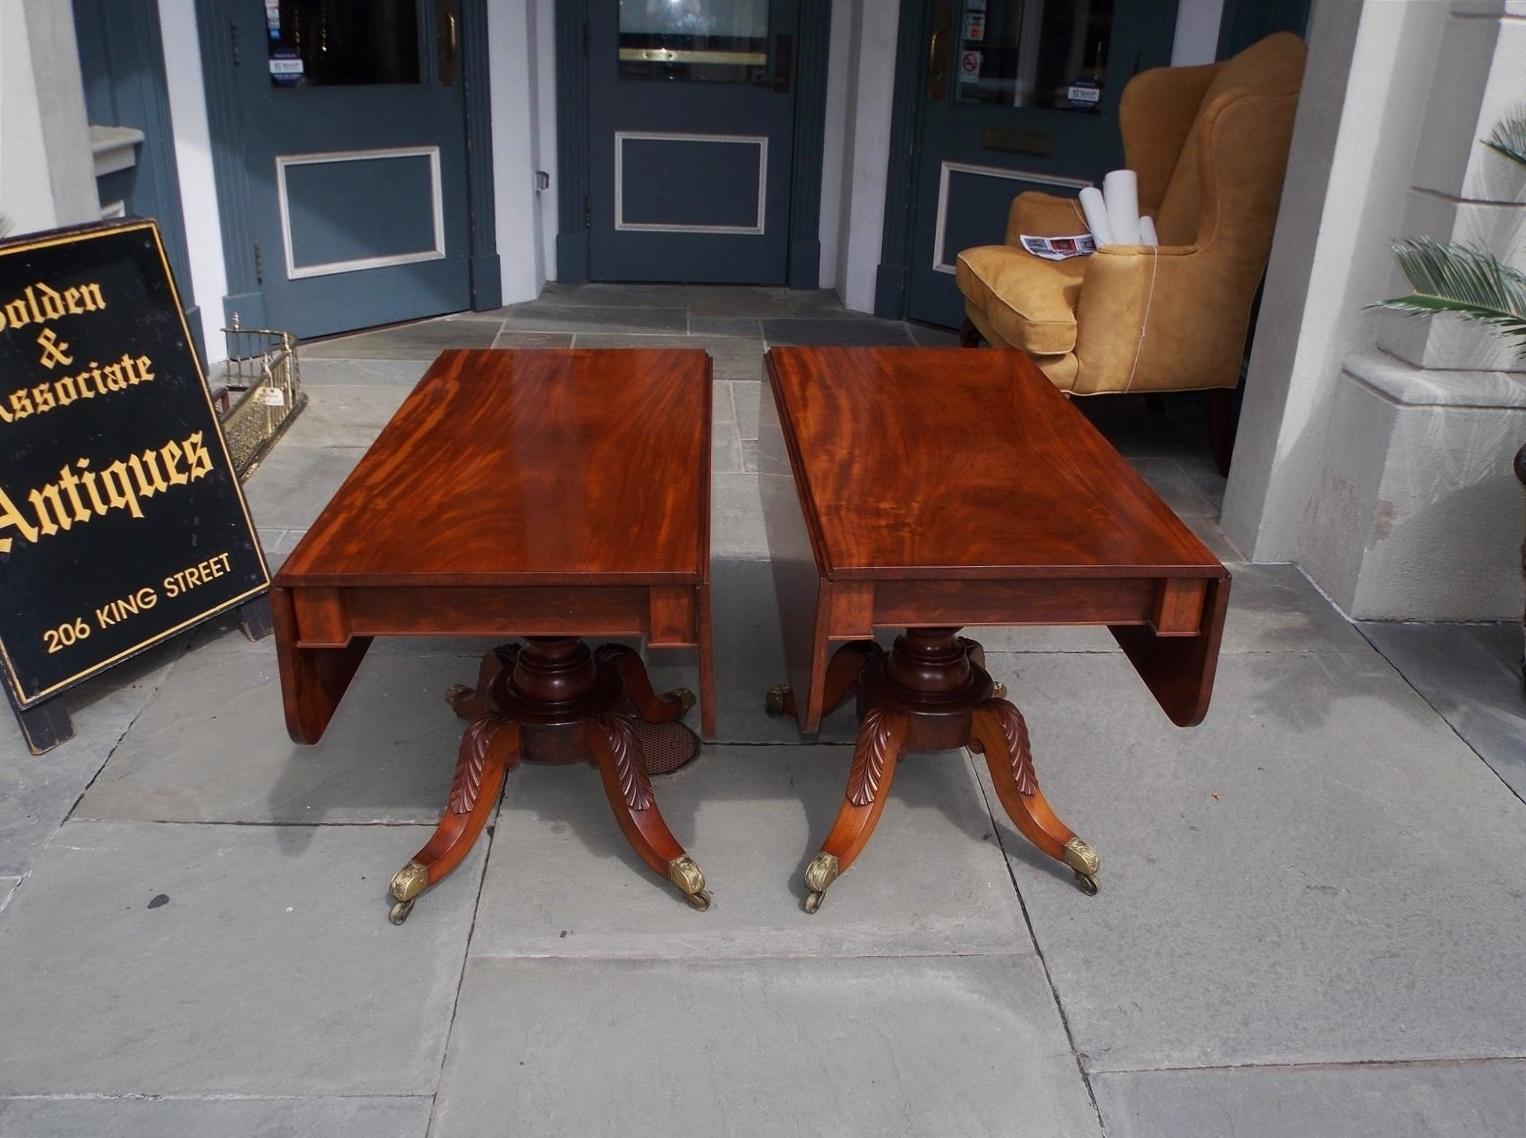 Pair of American mahogany drop-leaf pedestal card tables with turned bulbous centered columns, acanthus carved scroll work saber legs, and terminating on original brass decorative filigree casters. Philadelphia, Early 19th Century.
Tables are